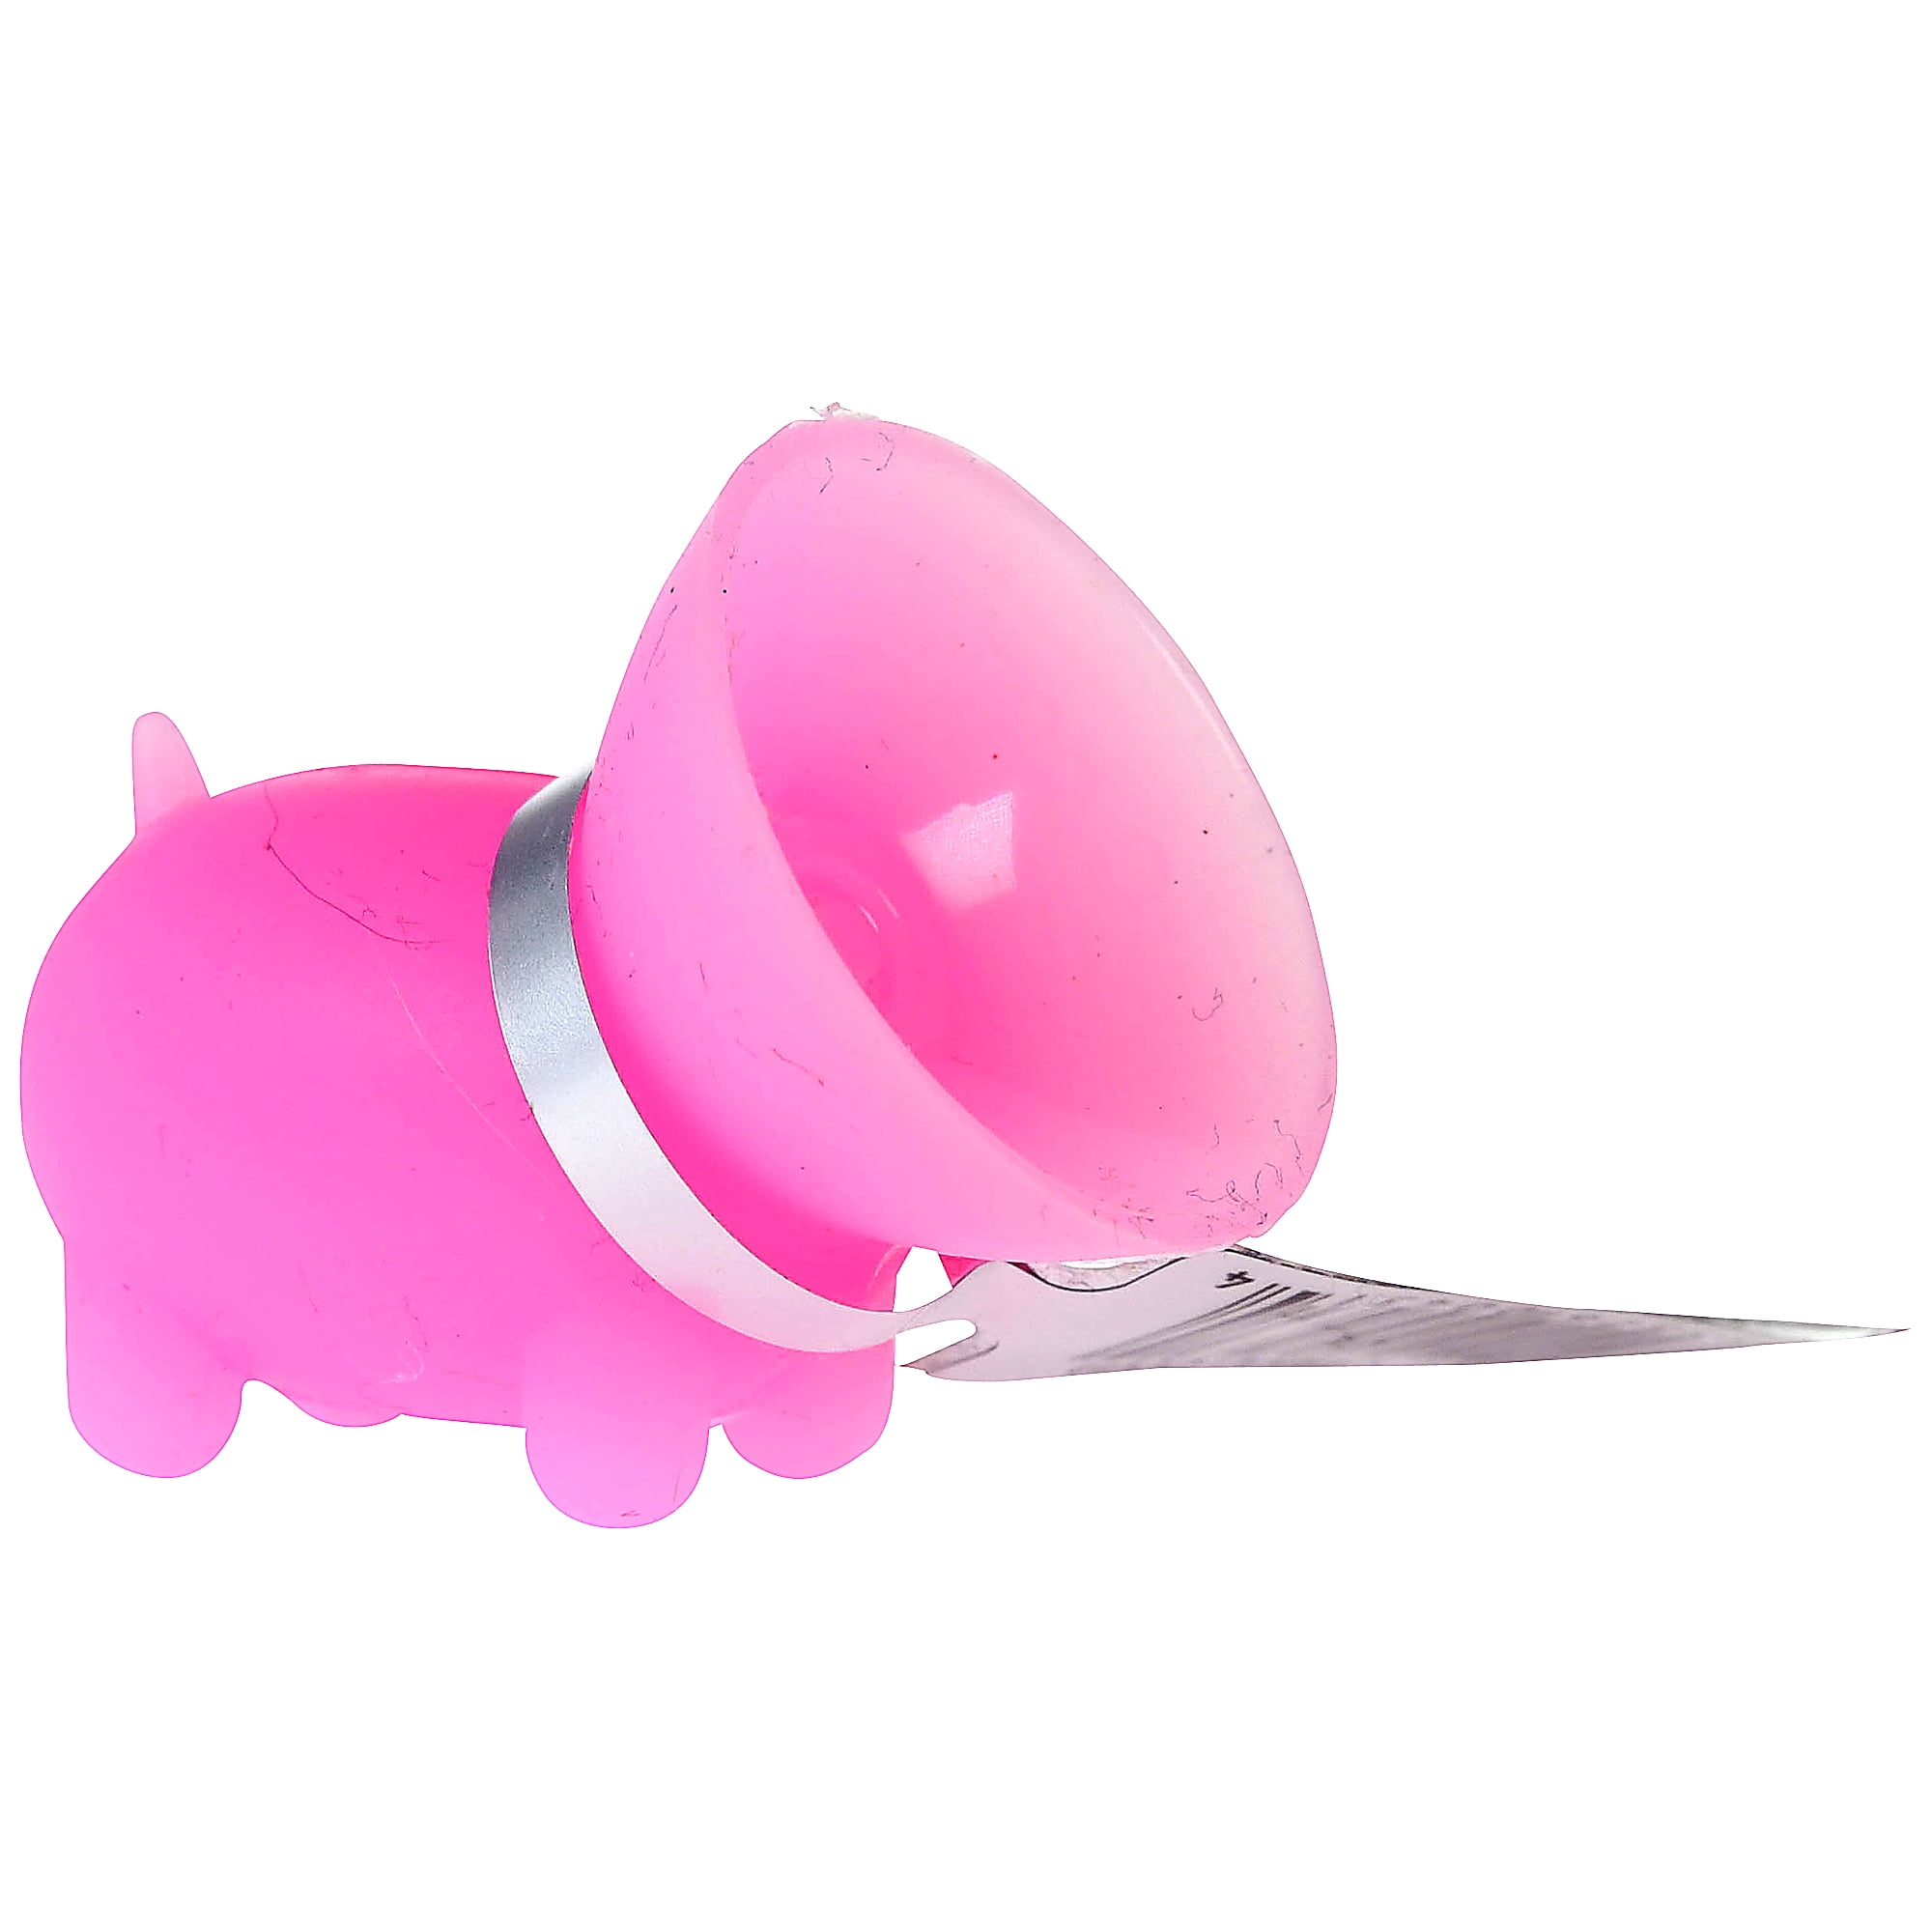  Killer Concepts The Original Piggy Cell Phone Stand / Cell  Phone Accessory (50 Count Display) : Cell Phones & Accessories